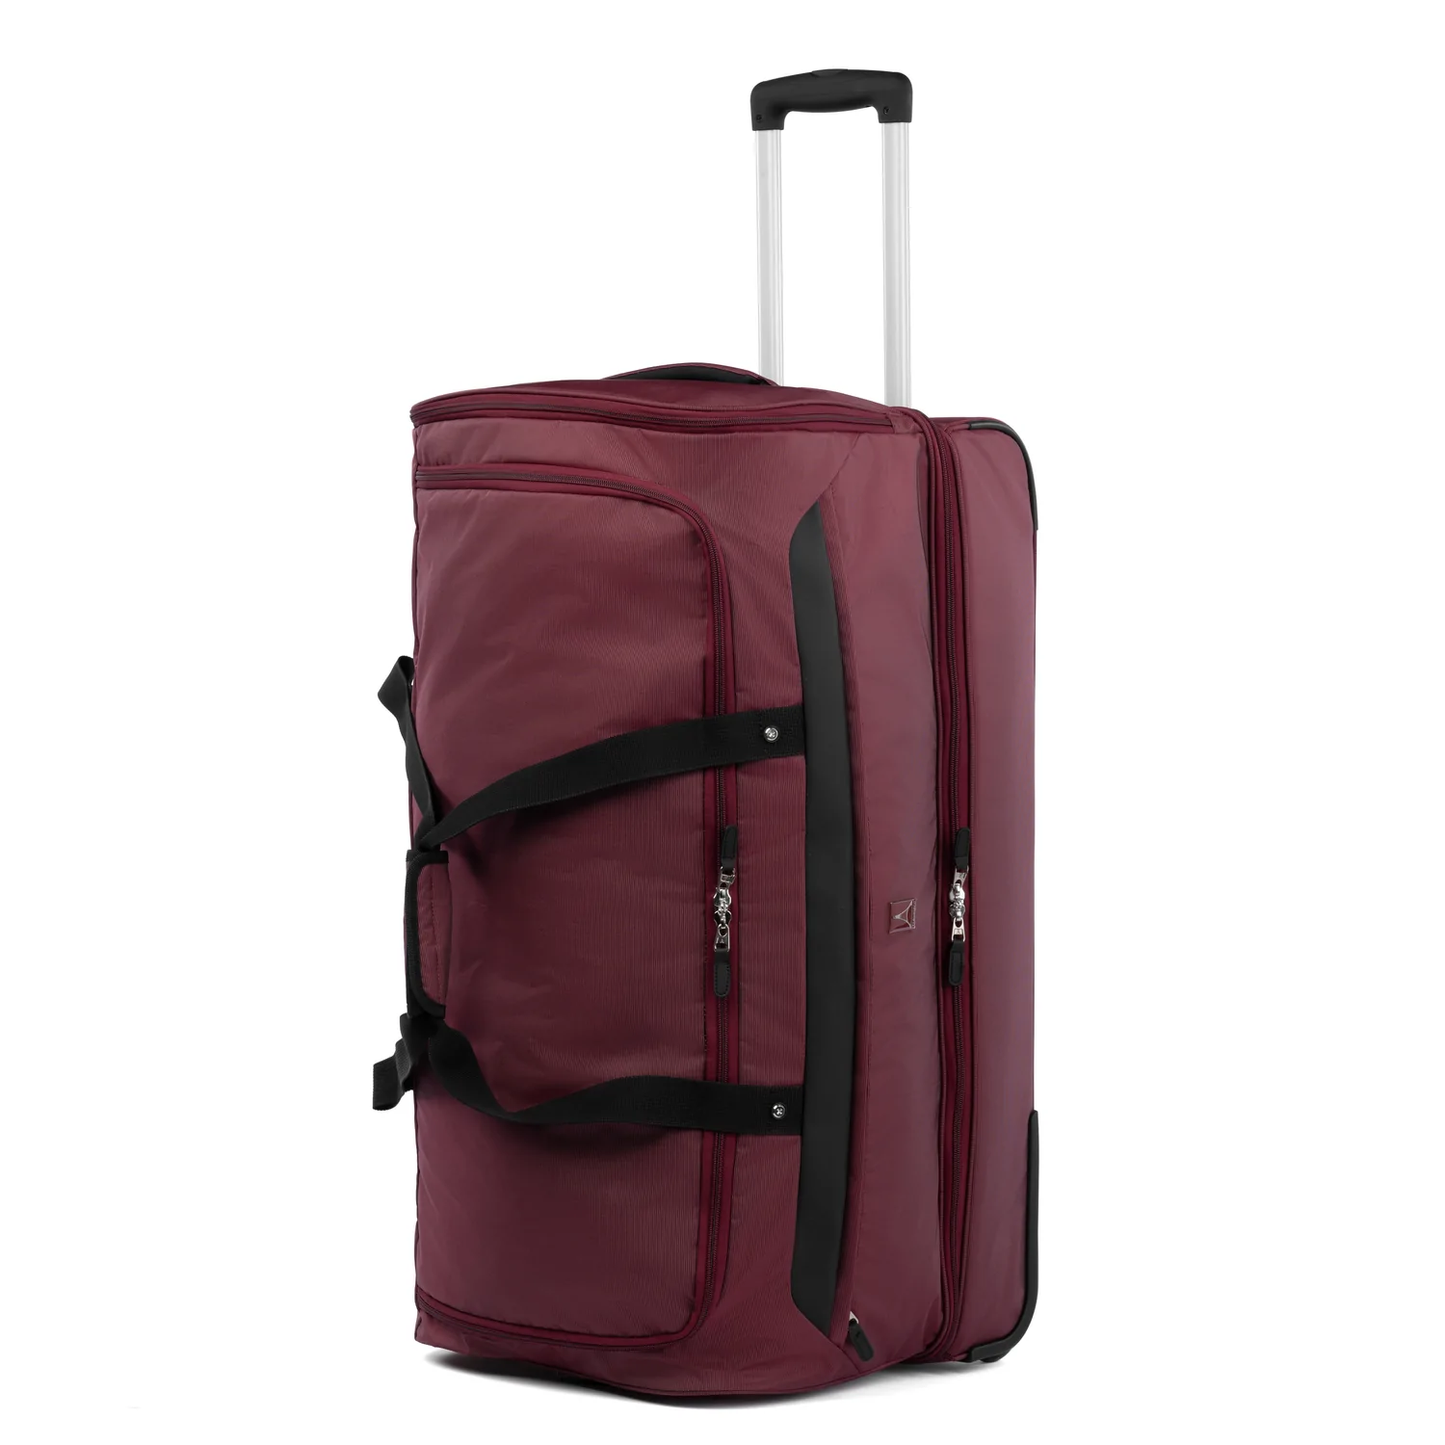 Travelpro Roadtrip 30" Wheeled Duffel with Packing Cubes